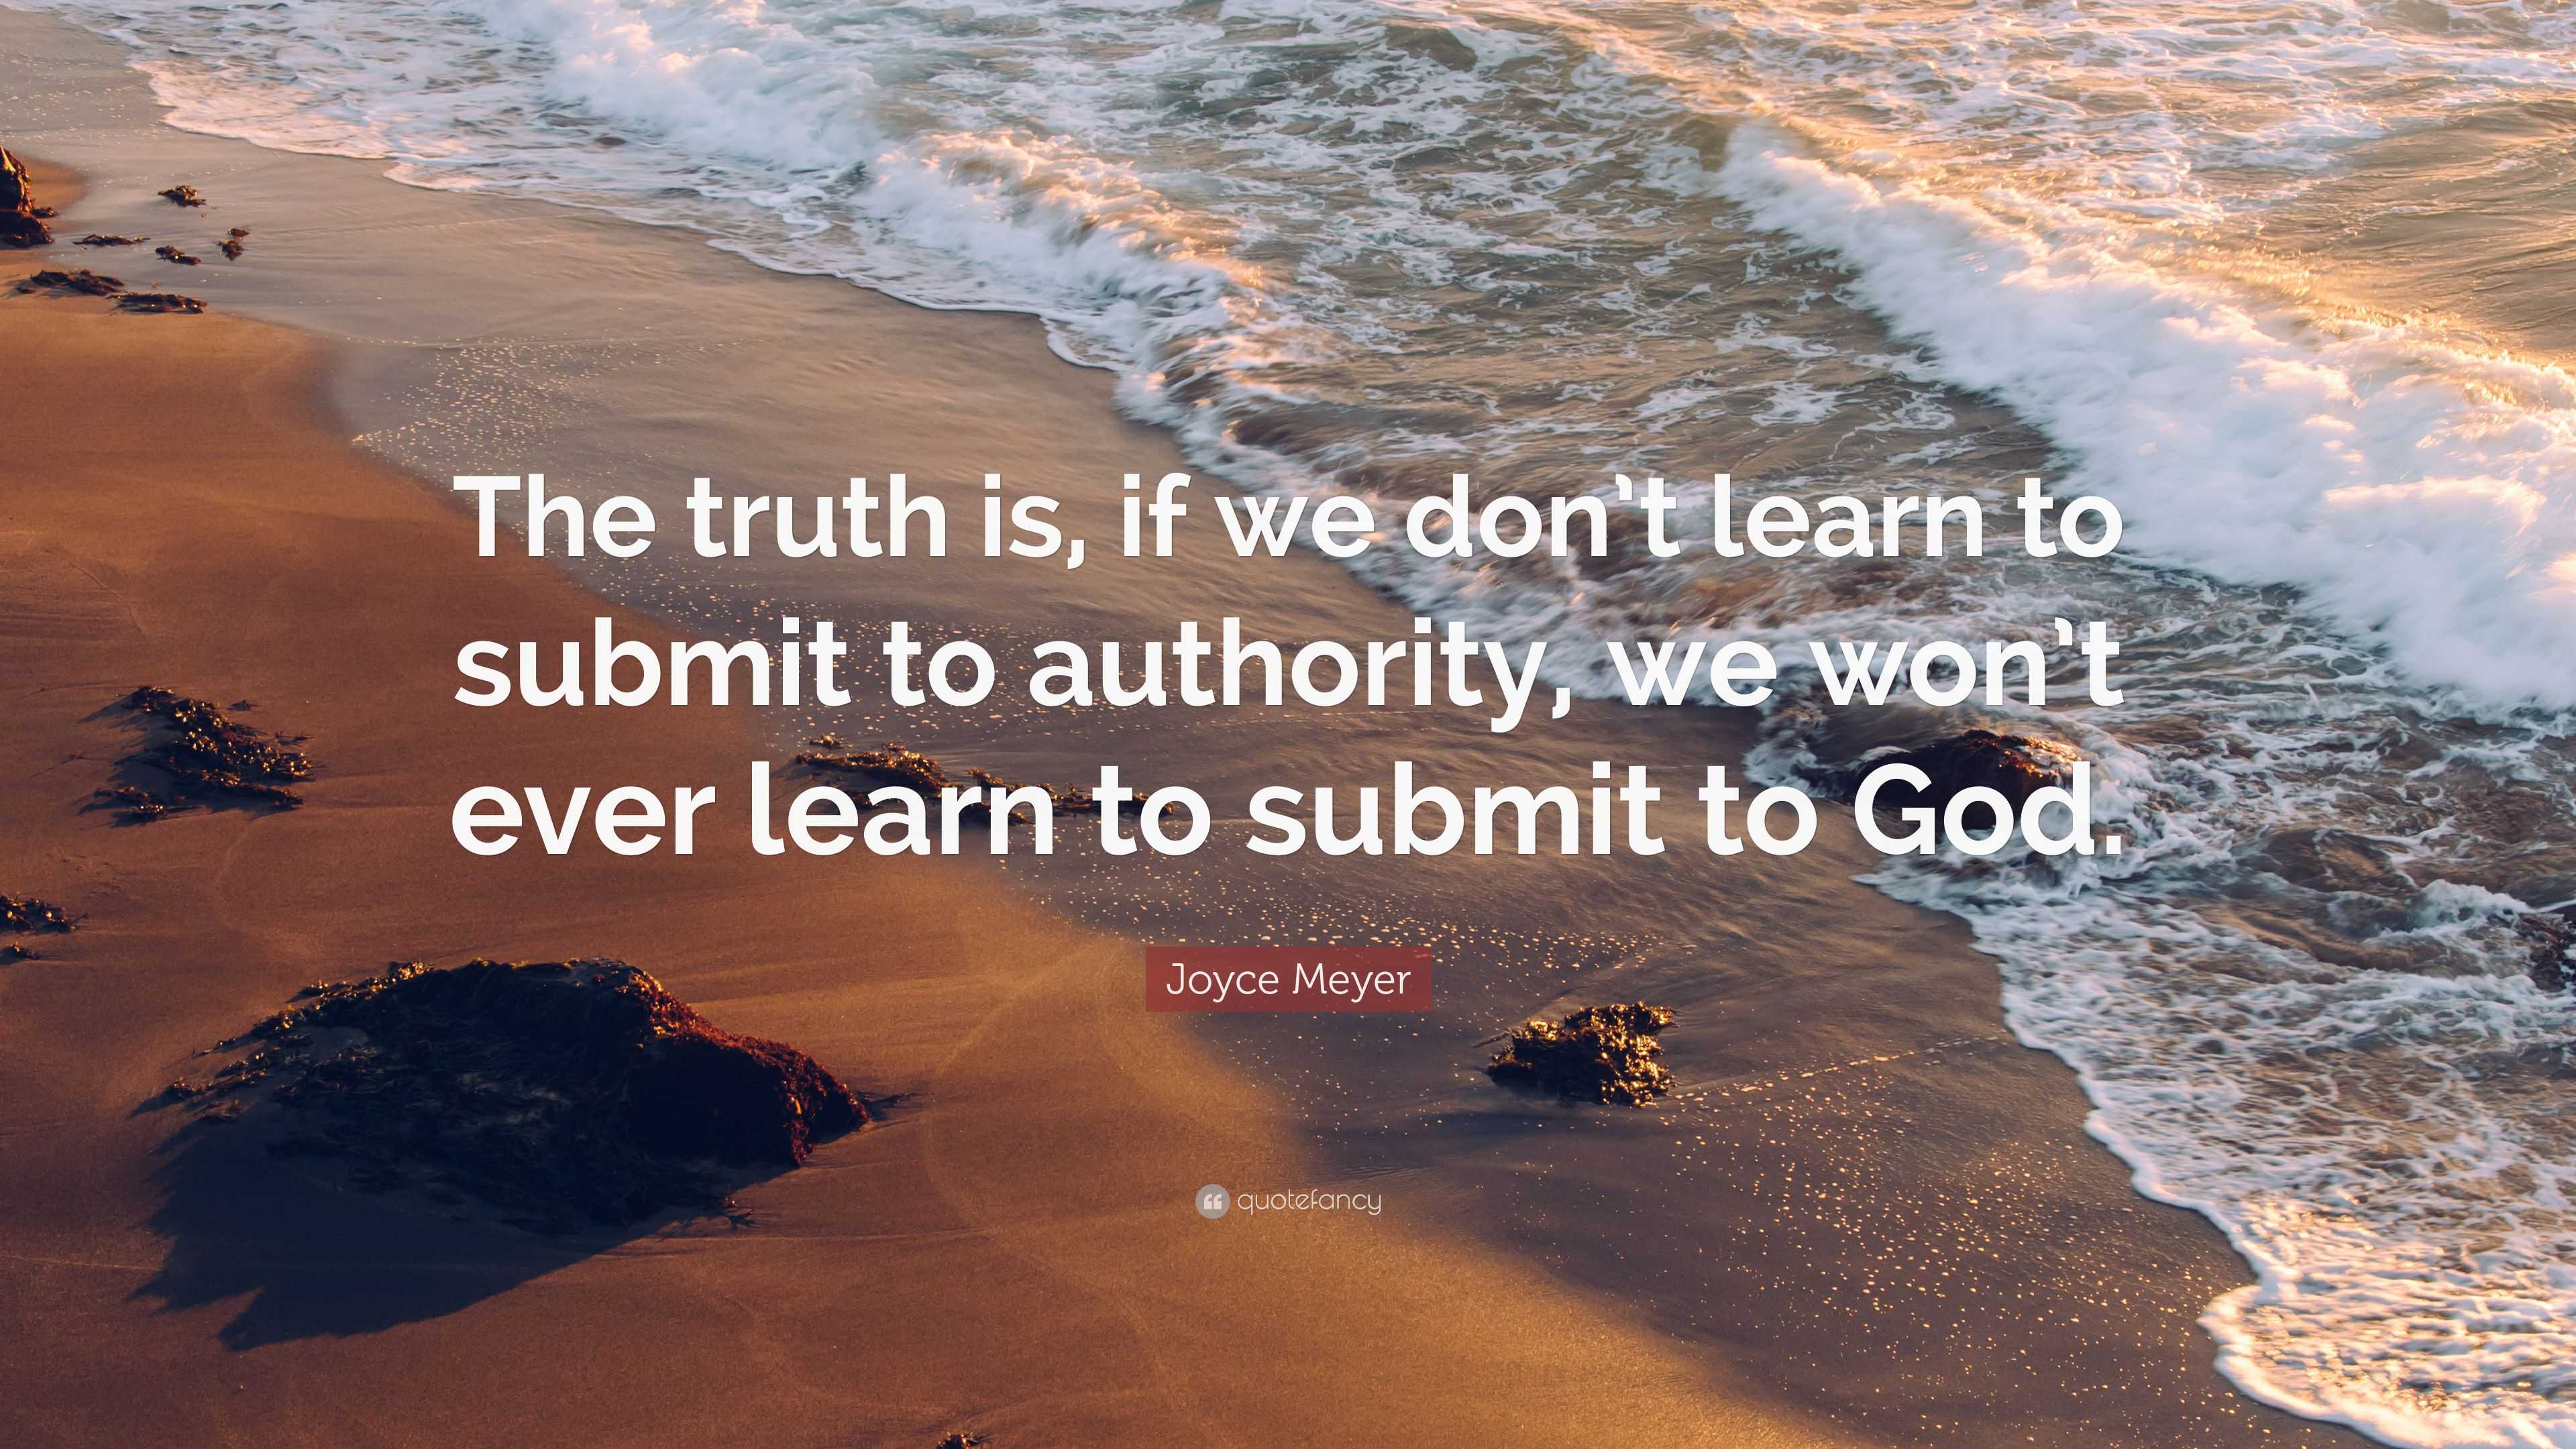 Joyce Meyer Quote: “The truth is, if we don’t learn to submit to ...